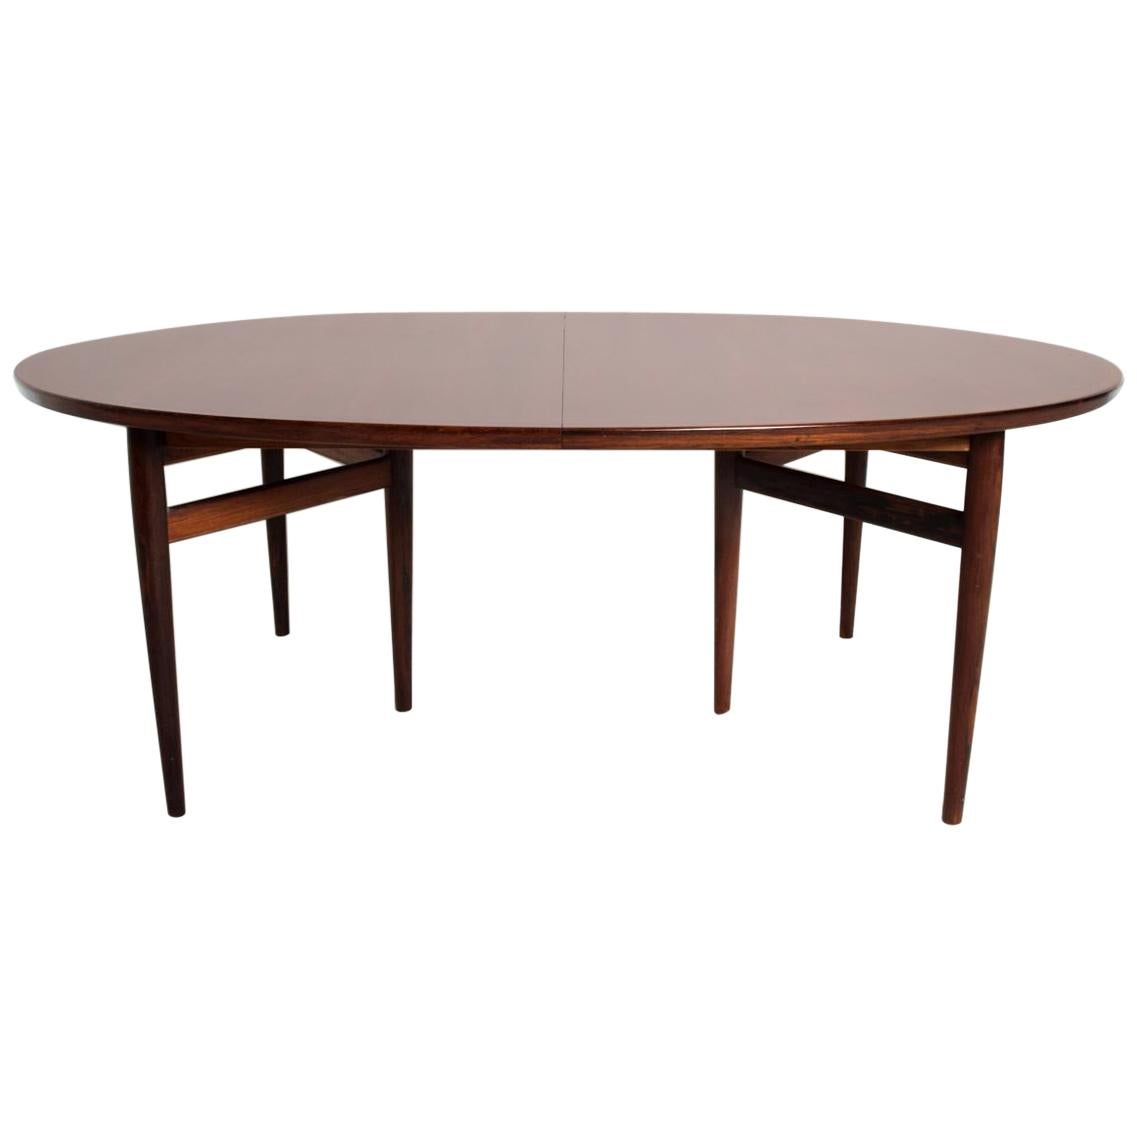 Midcentury Danish Modern Rosewood Oval Dining Table by Arne Vodder for SIBAST